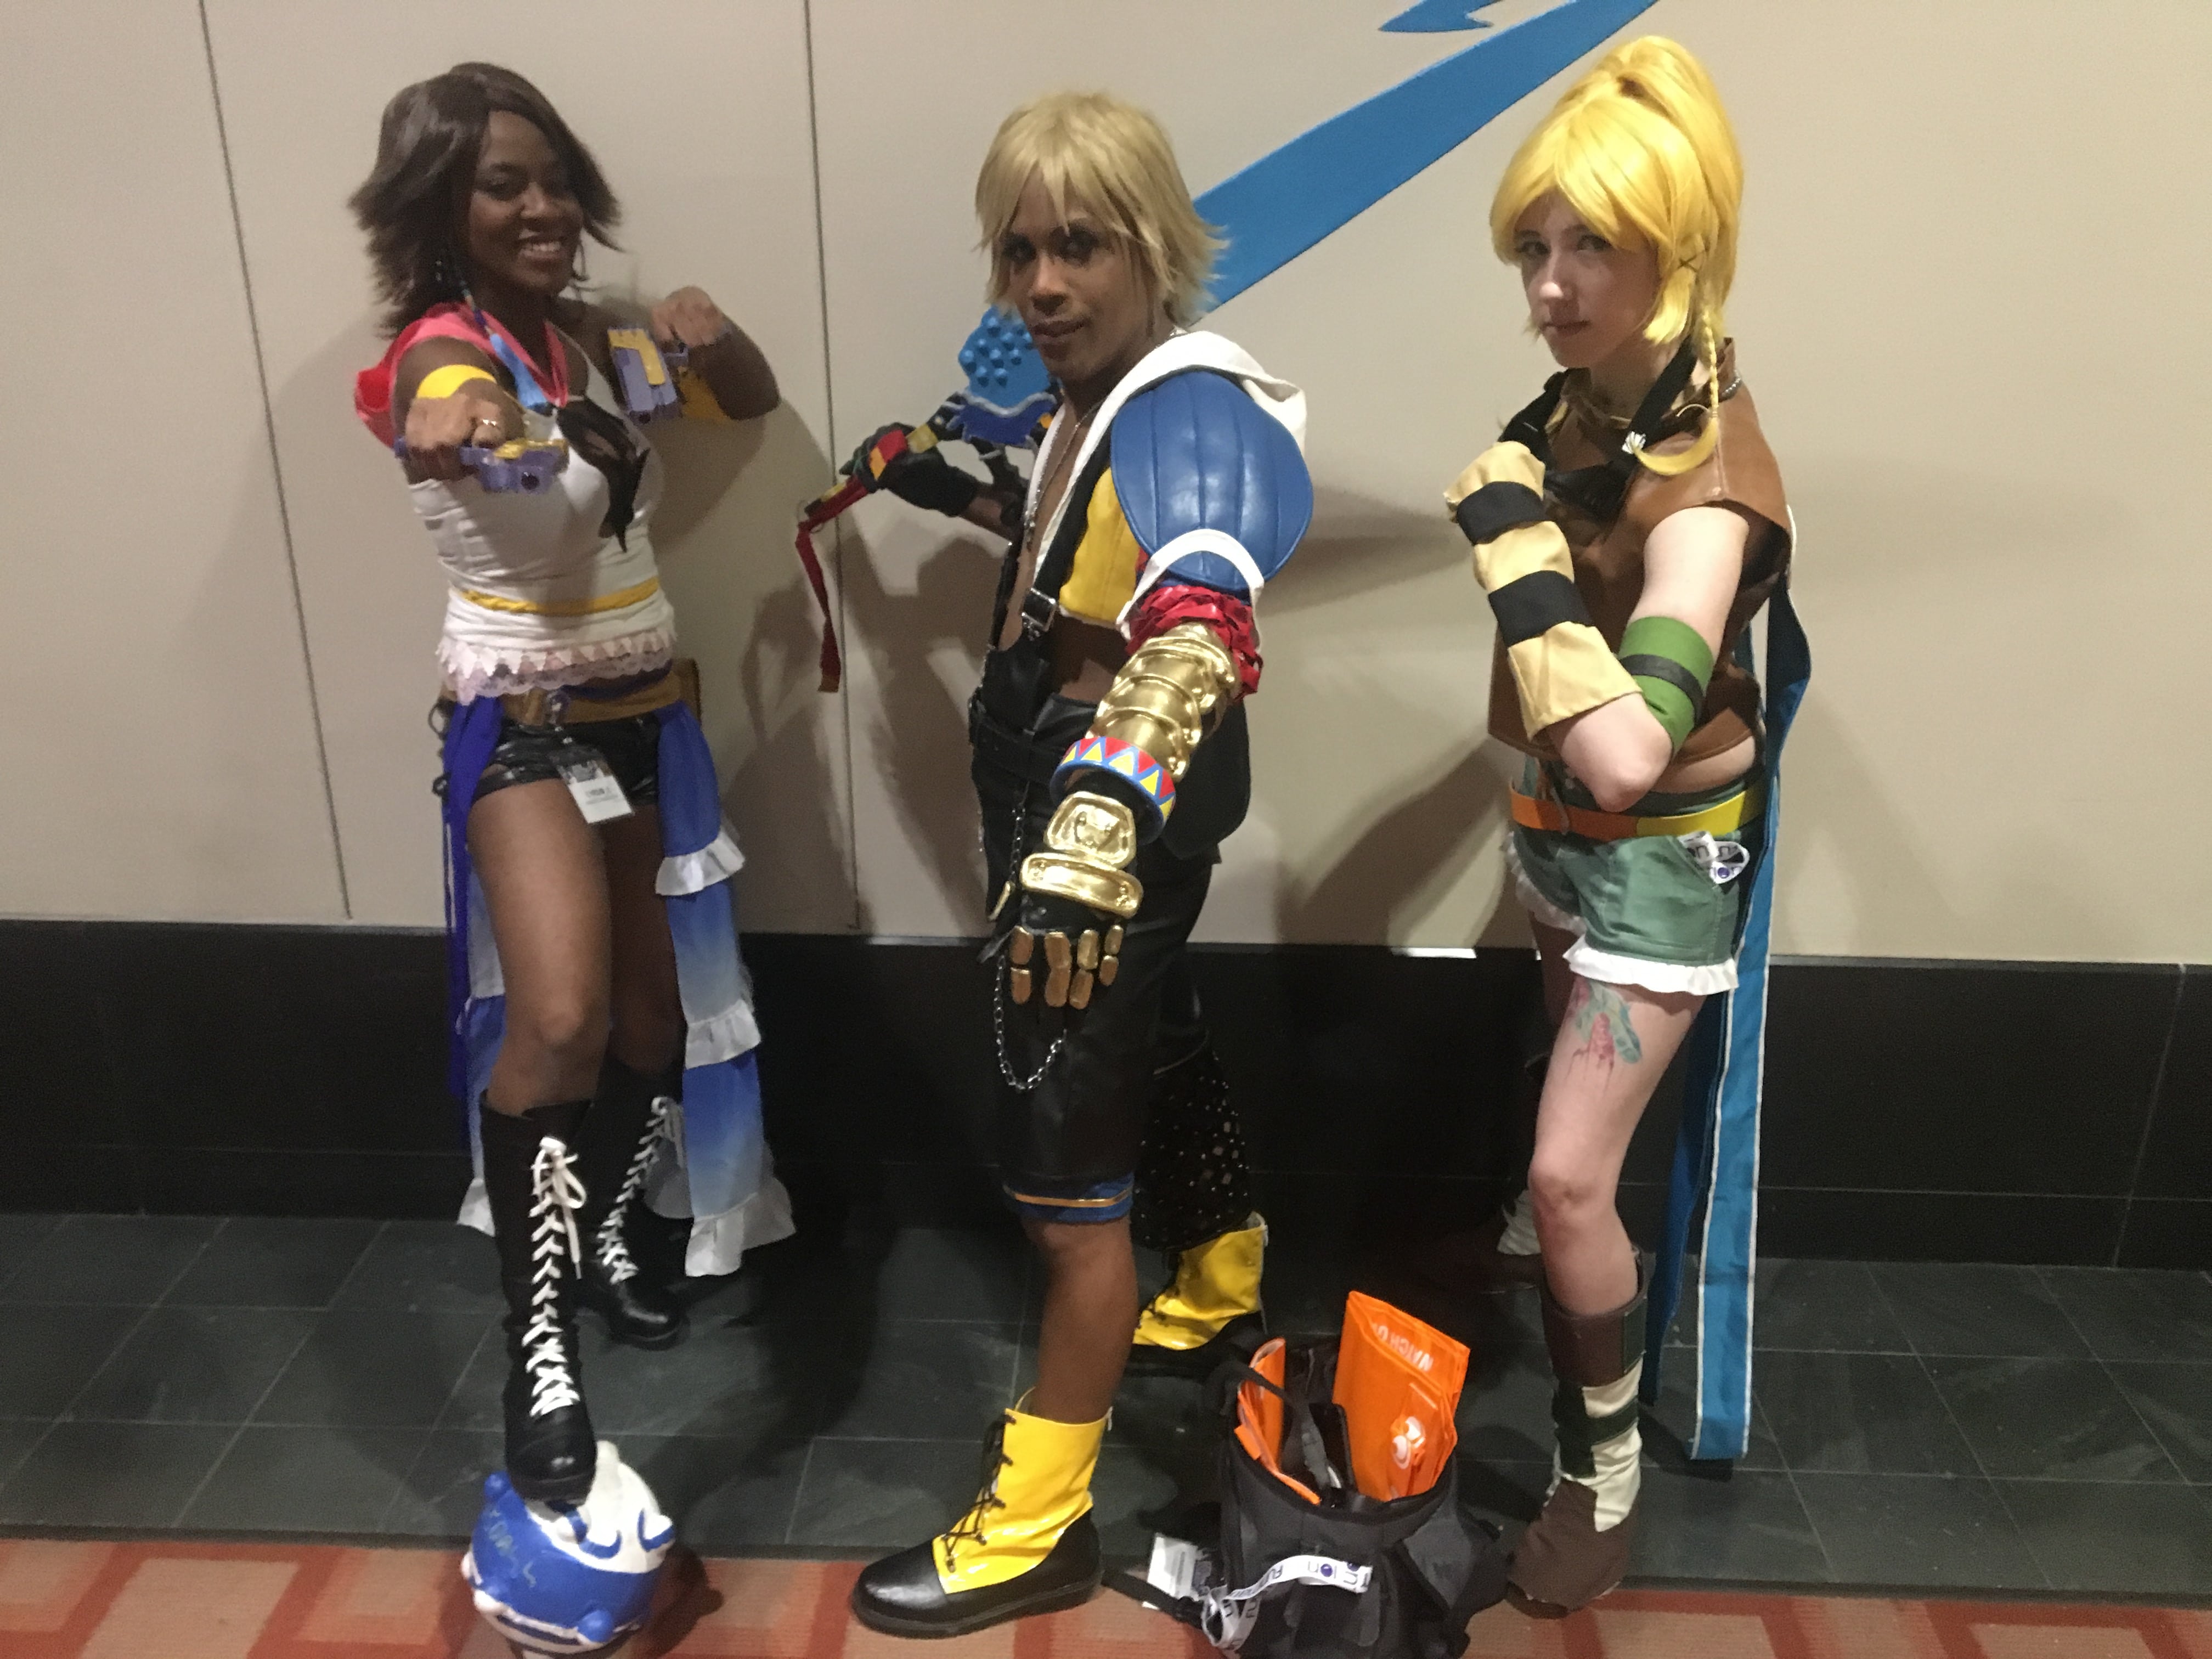 Why Do Anime Conventions Have Raves? - Answerman - Anime News Network